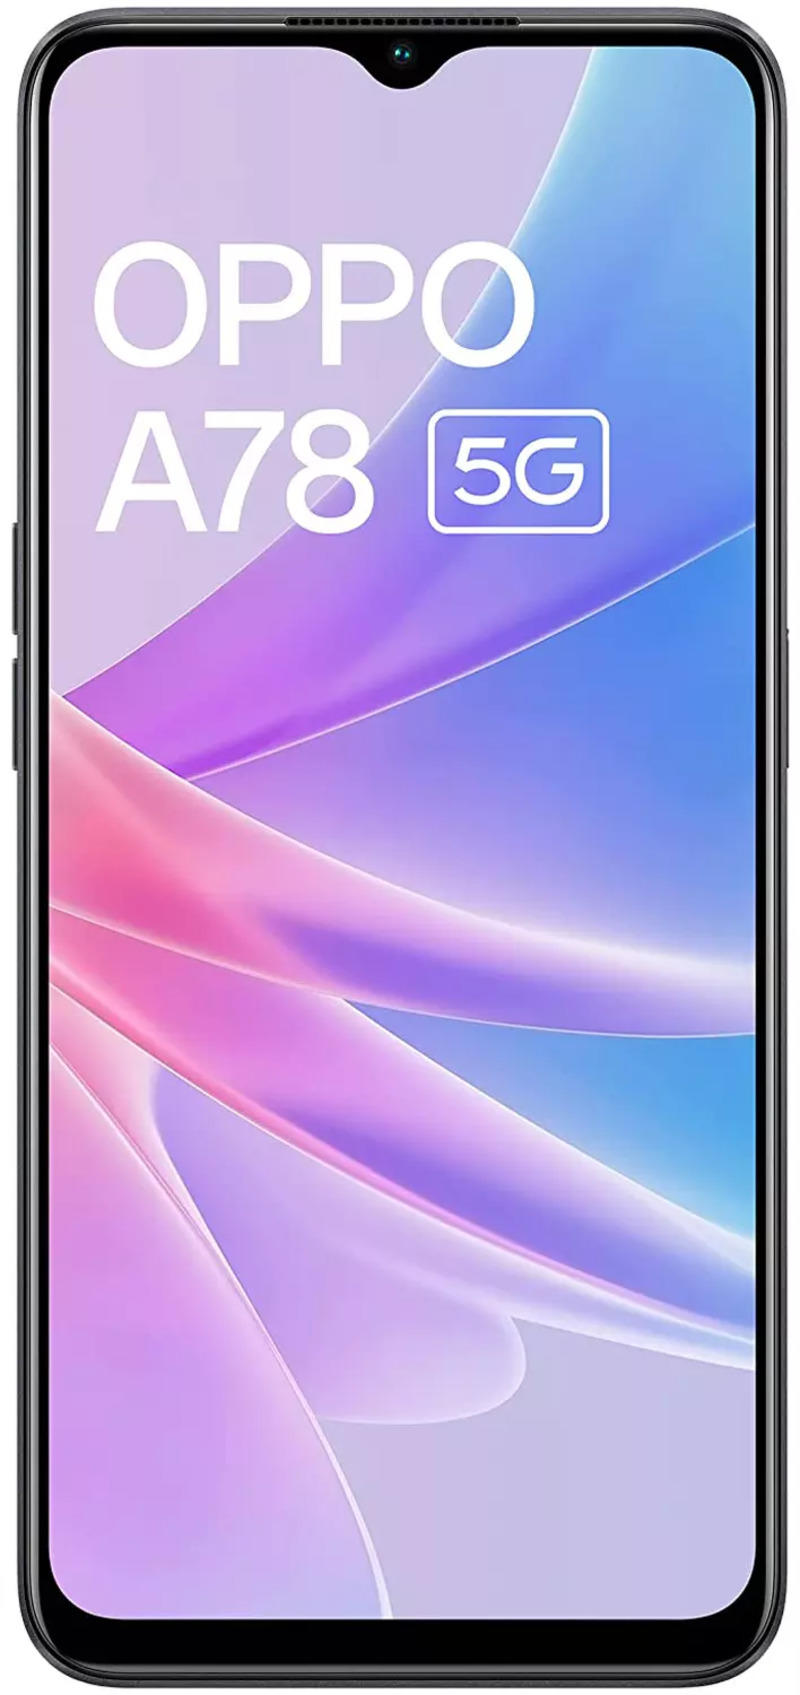 OPPO A78 5G (5000 mAh Battery, 128 GB Storage) Price and features